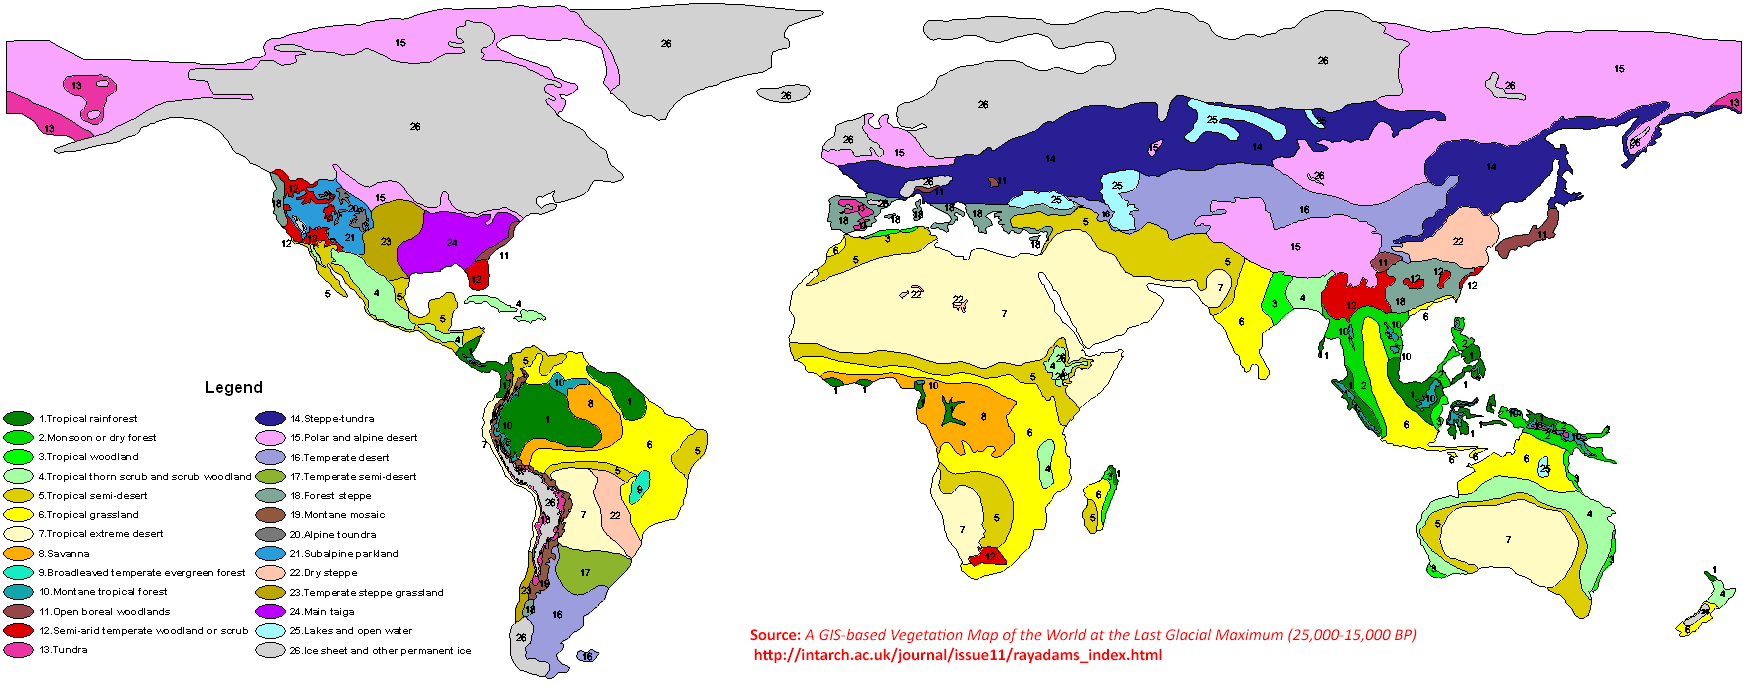 Map_-_Global_Last_Glacial_Maximum_Vegetation_Map_with_Ecosystem_Type_Classification_v2_%282011%29.png